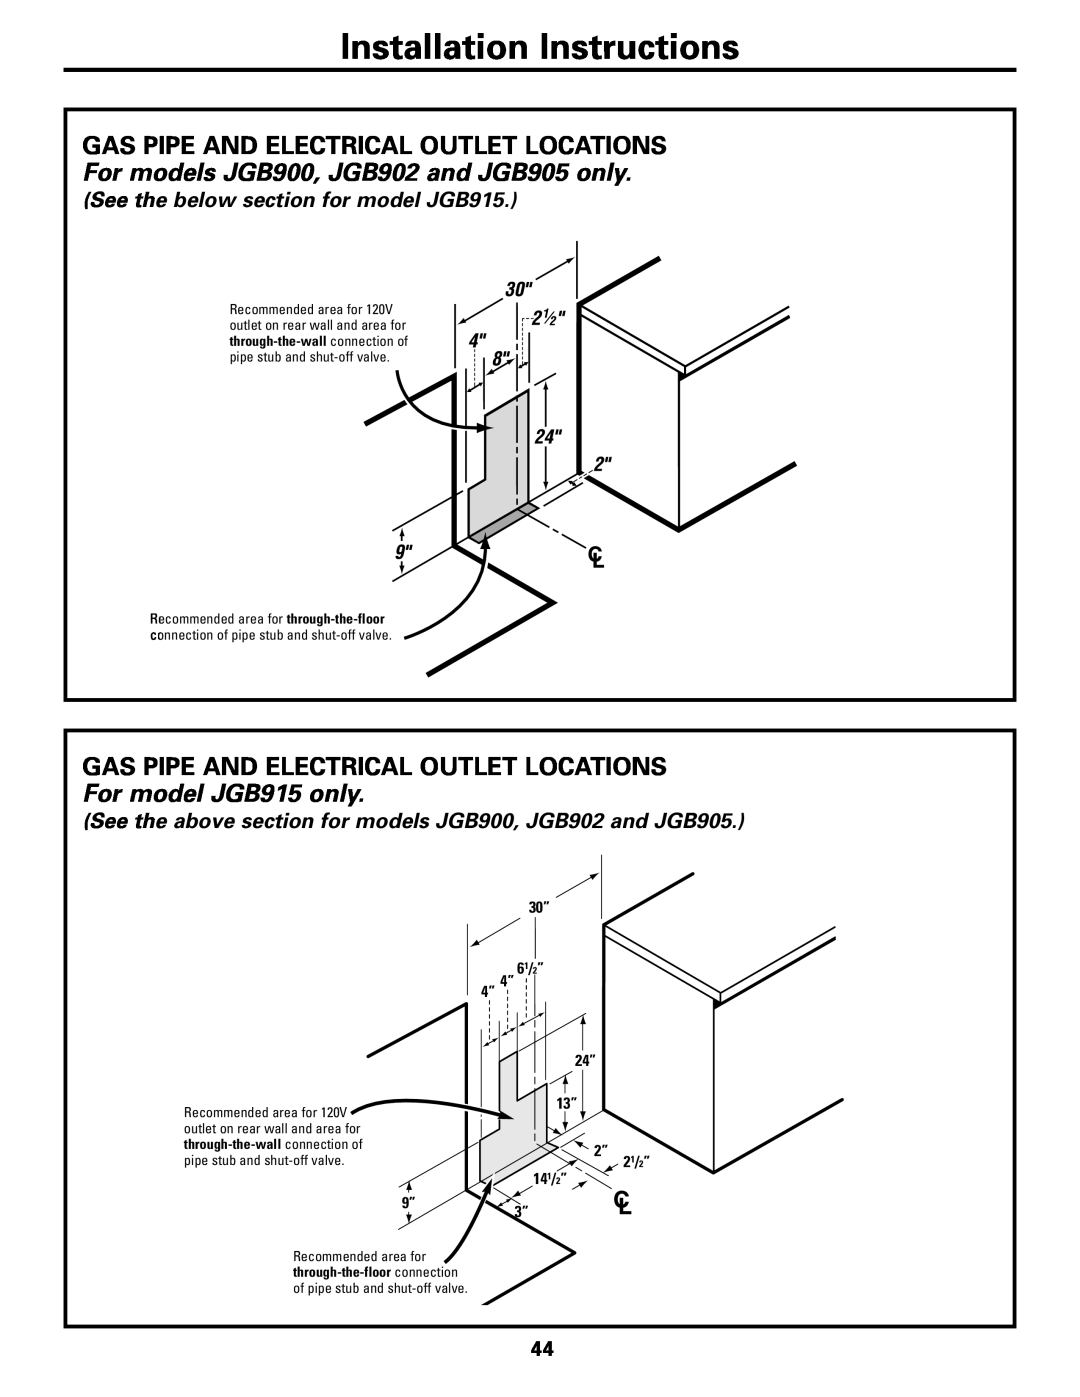 GE JGB905 Installation Instructions, See the below section for model JGB915, 30” 61/2” 4” 4” 24” 13” 2” 141/2” 3”, 21/2” 